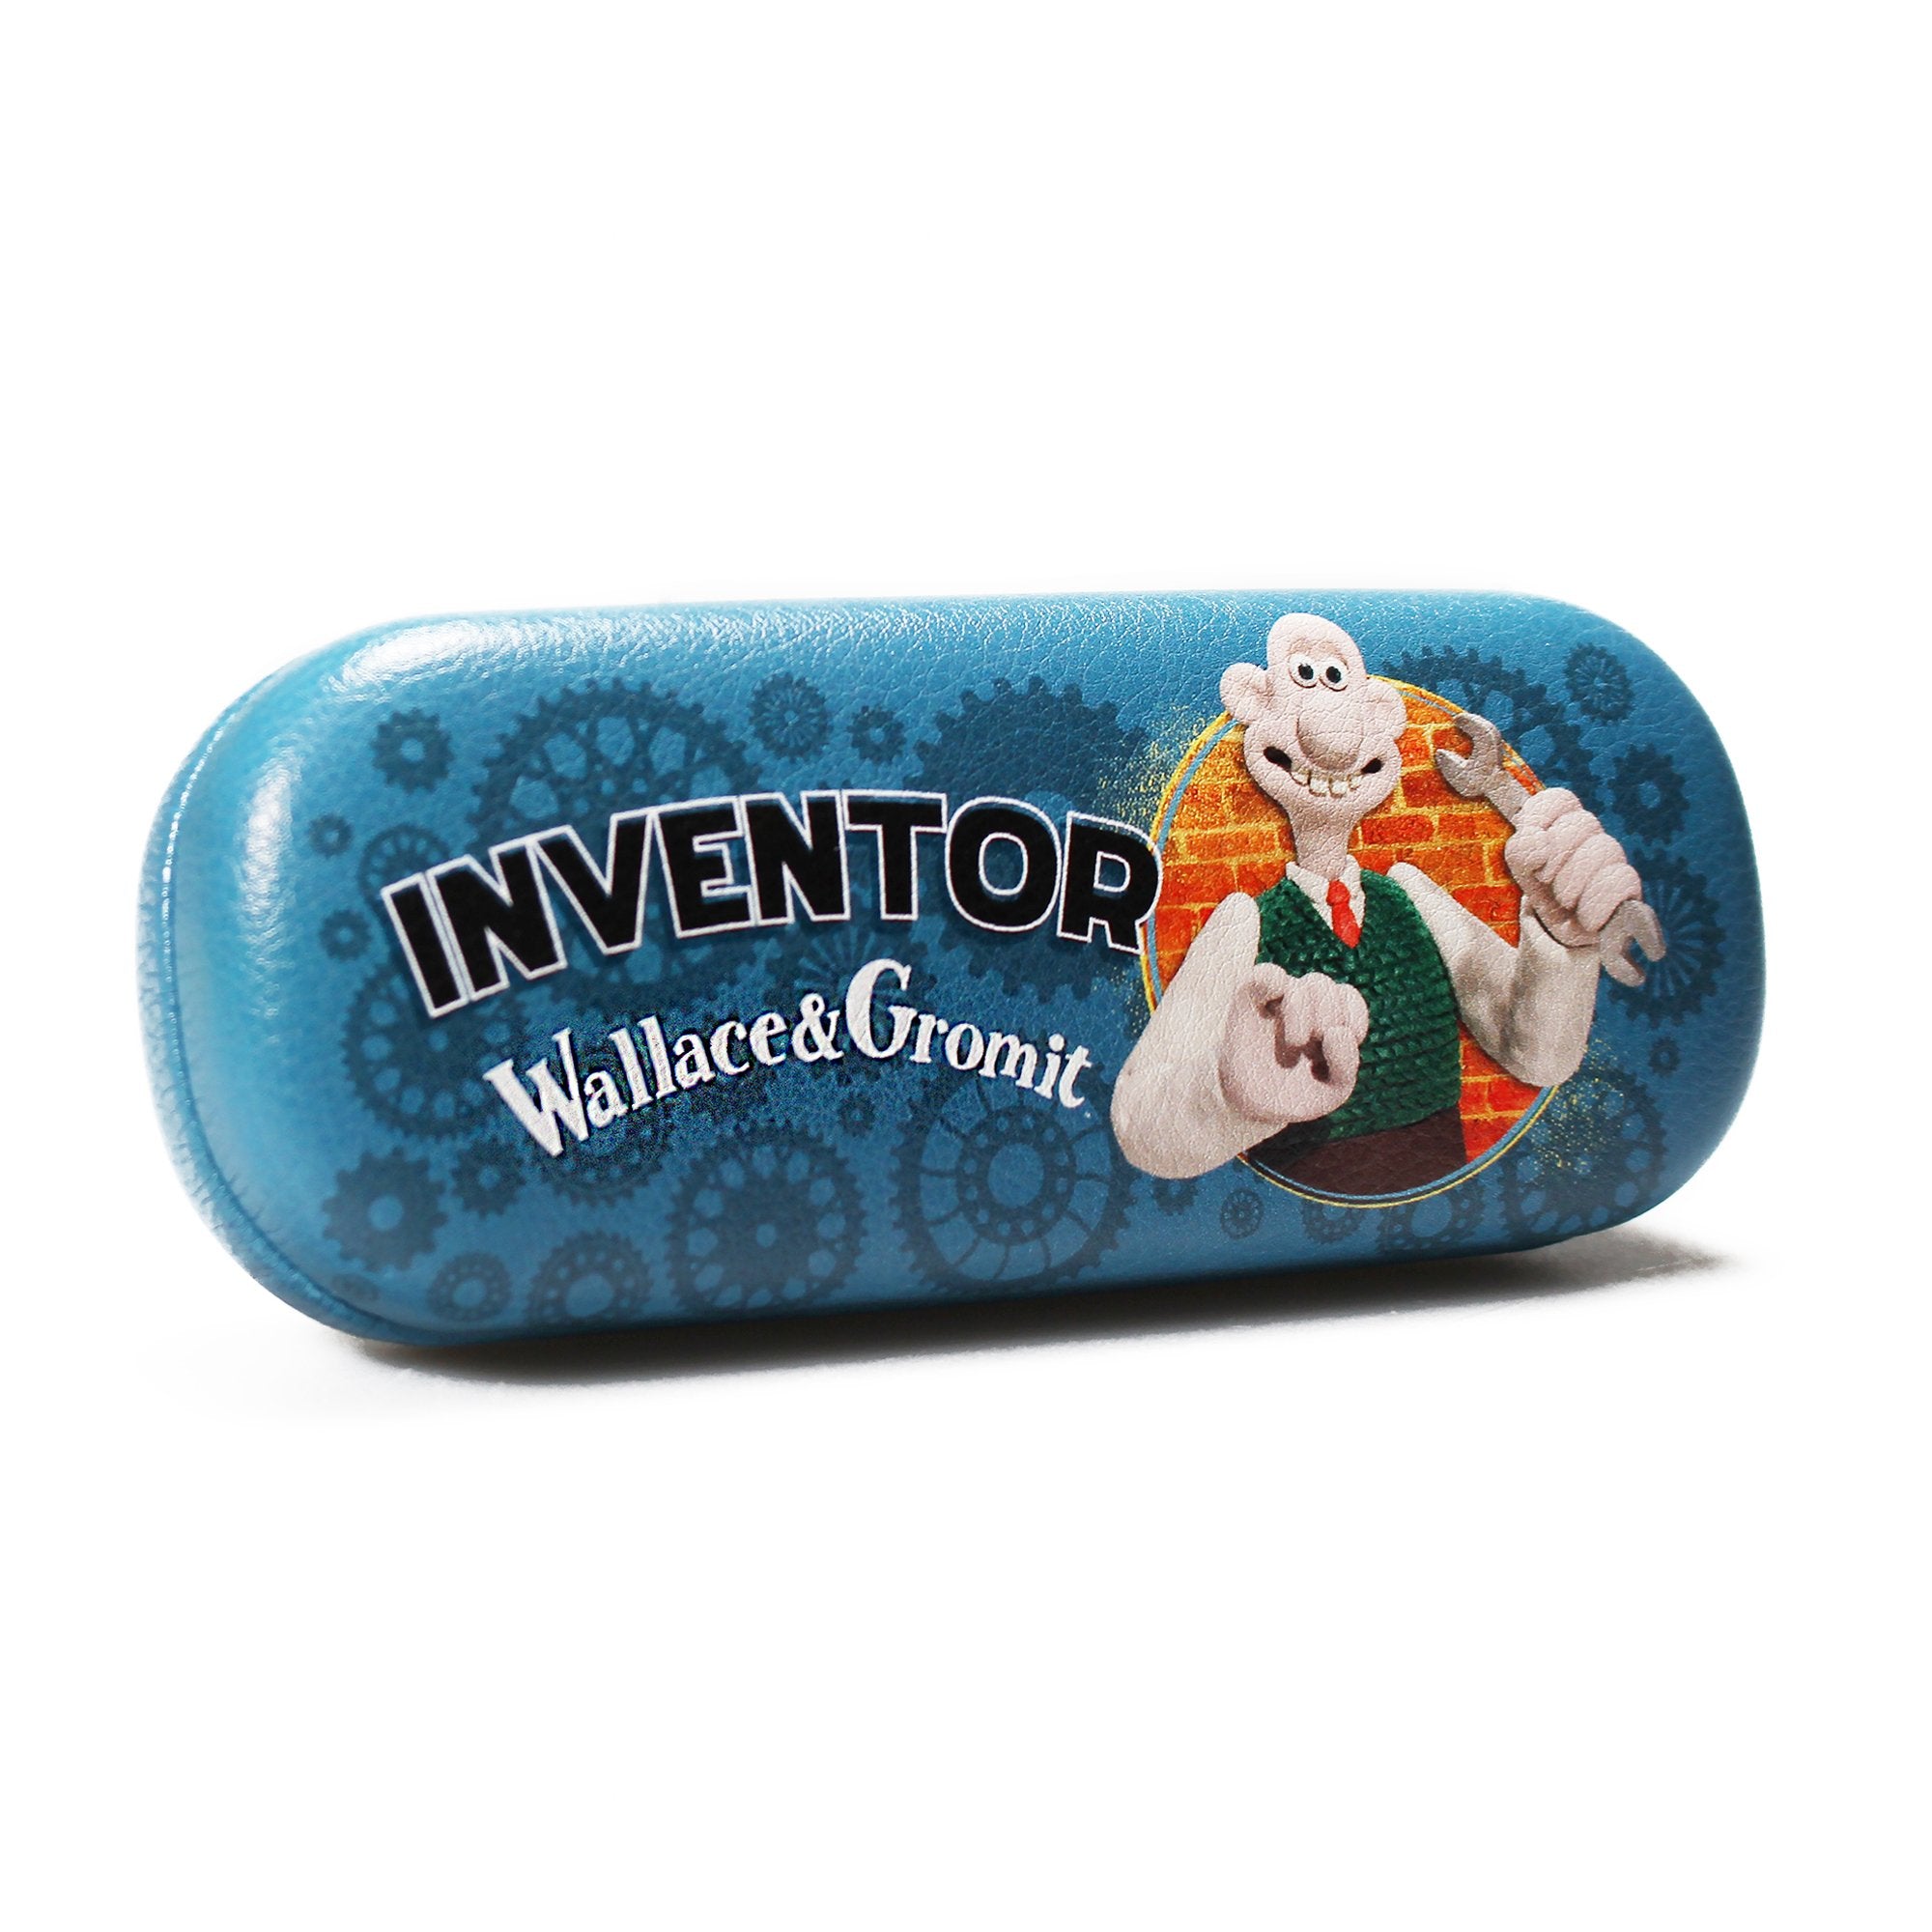 Glasses Case (Hard) - Wallace & Gromit (Inventor)